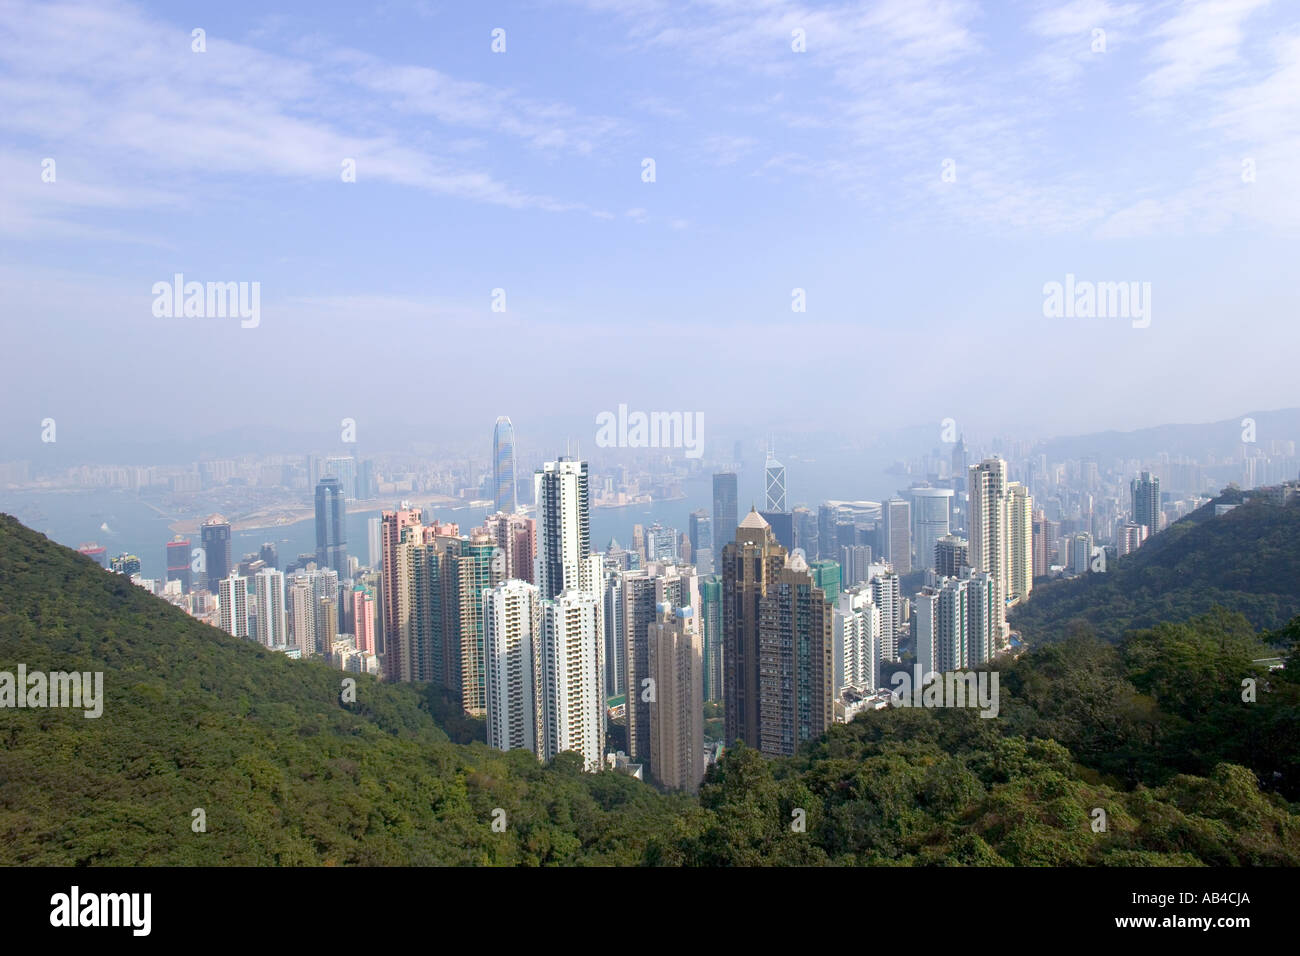 An aerial view over Hong Kong and Victoria Harbour taken from the Peak. Stock Photo